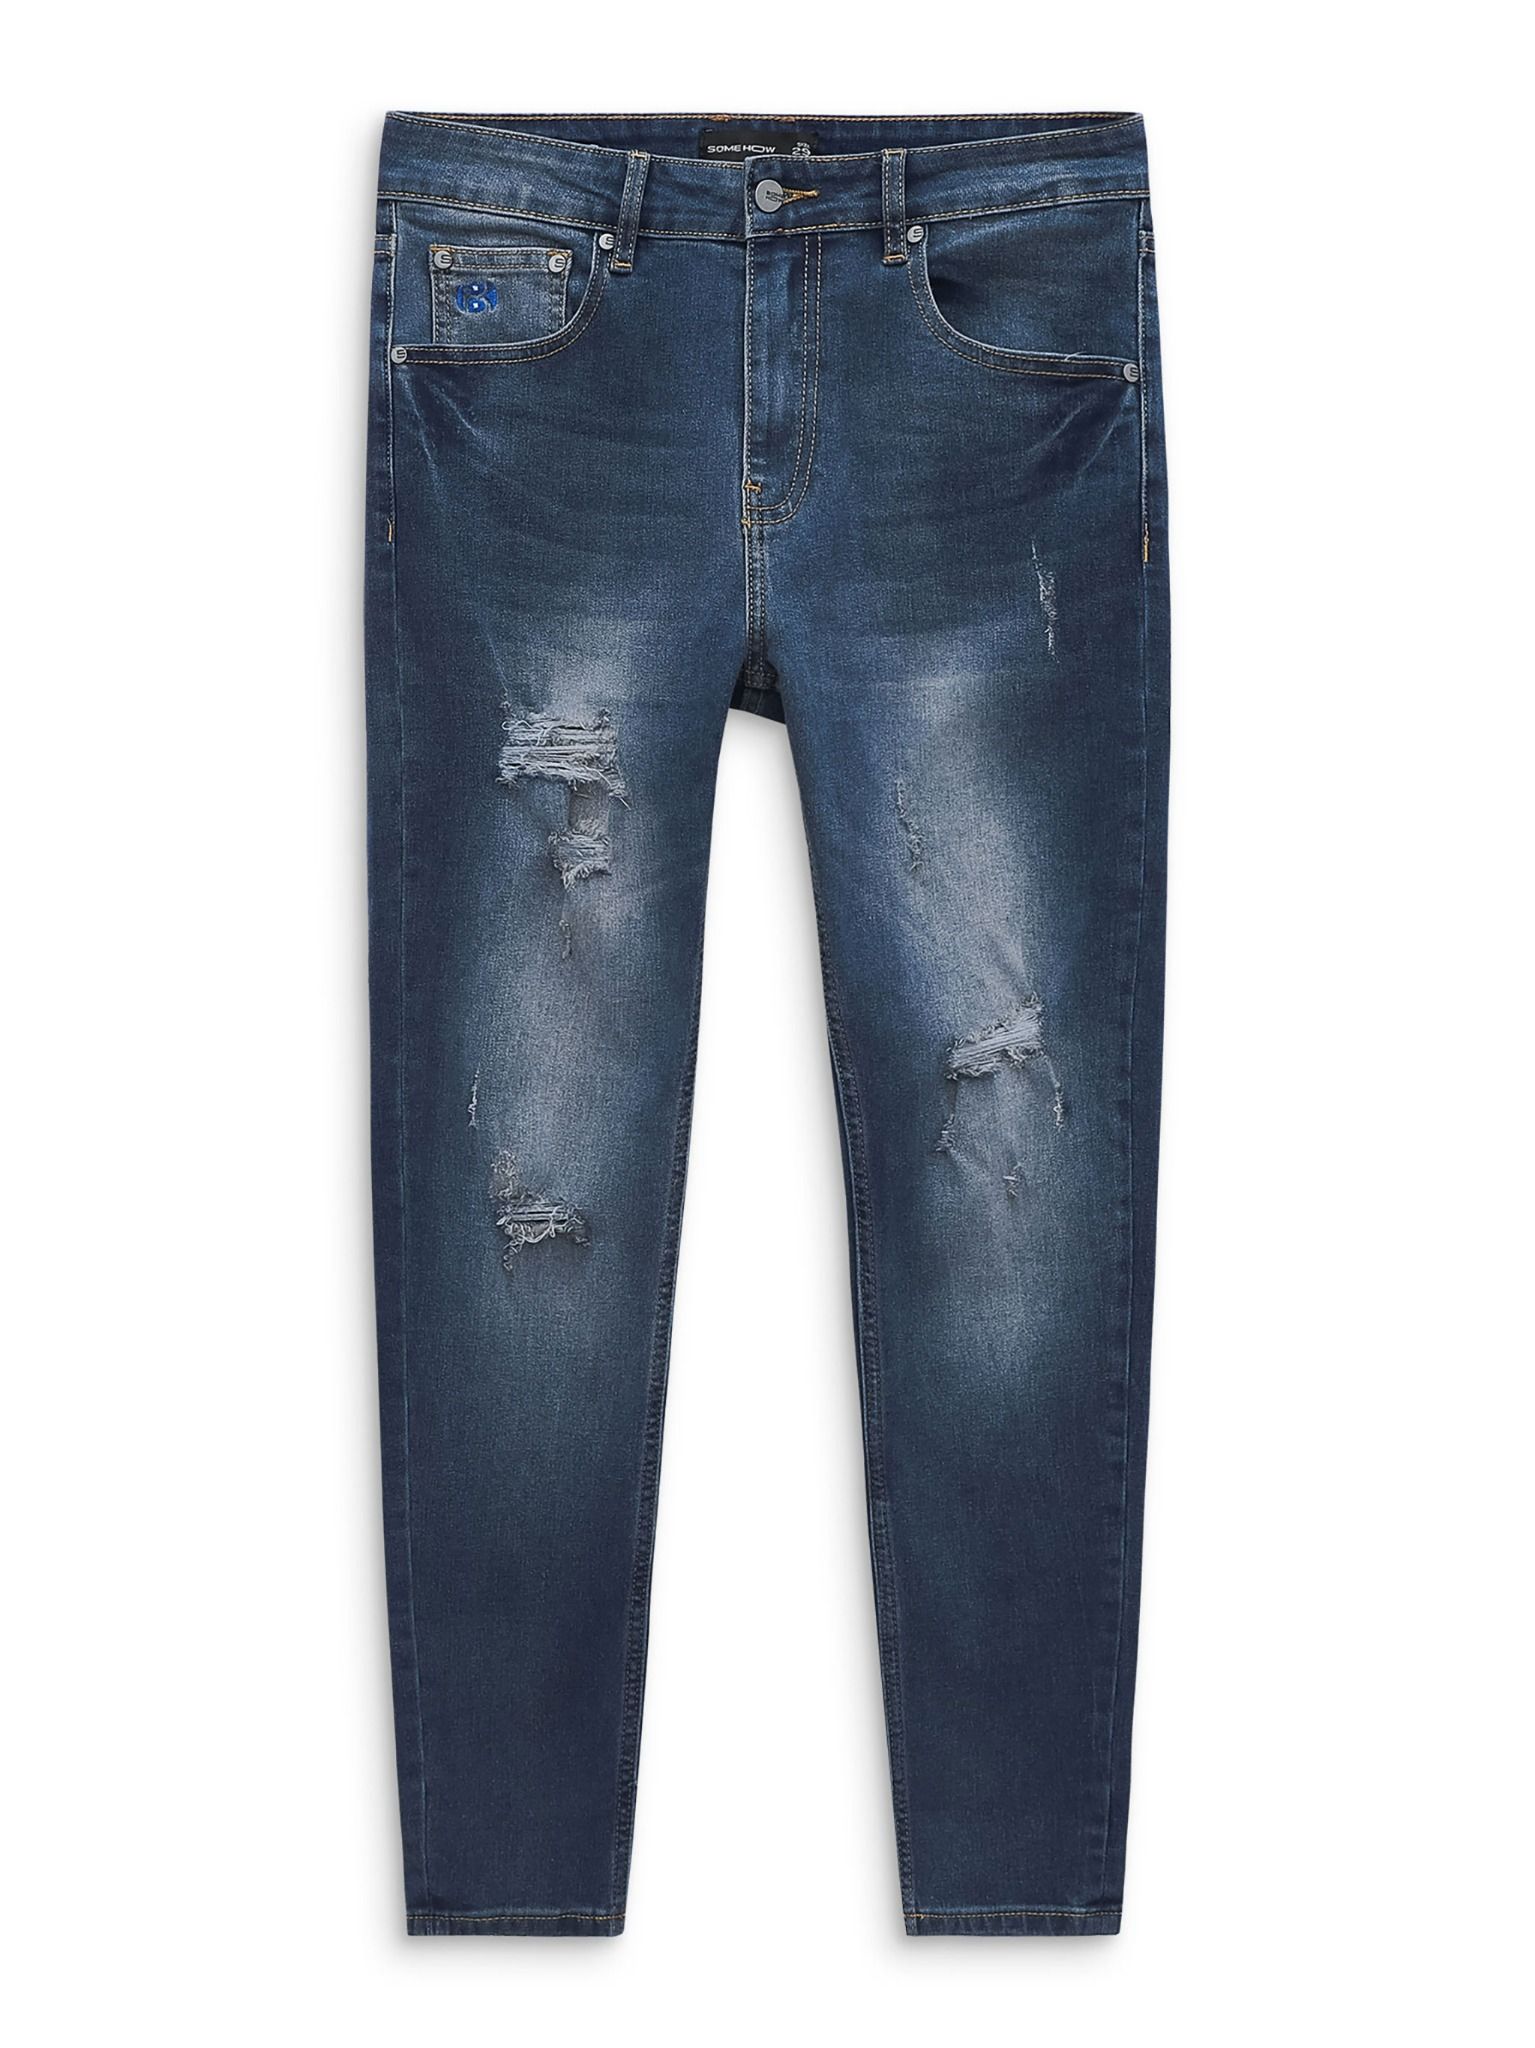 Quần Jean Skinny Ripdetails Blue